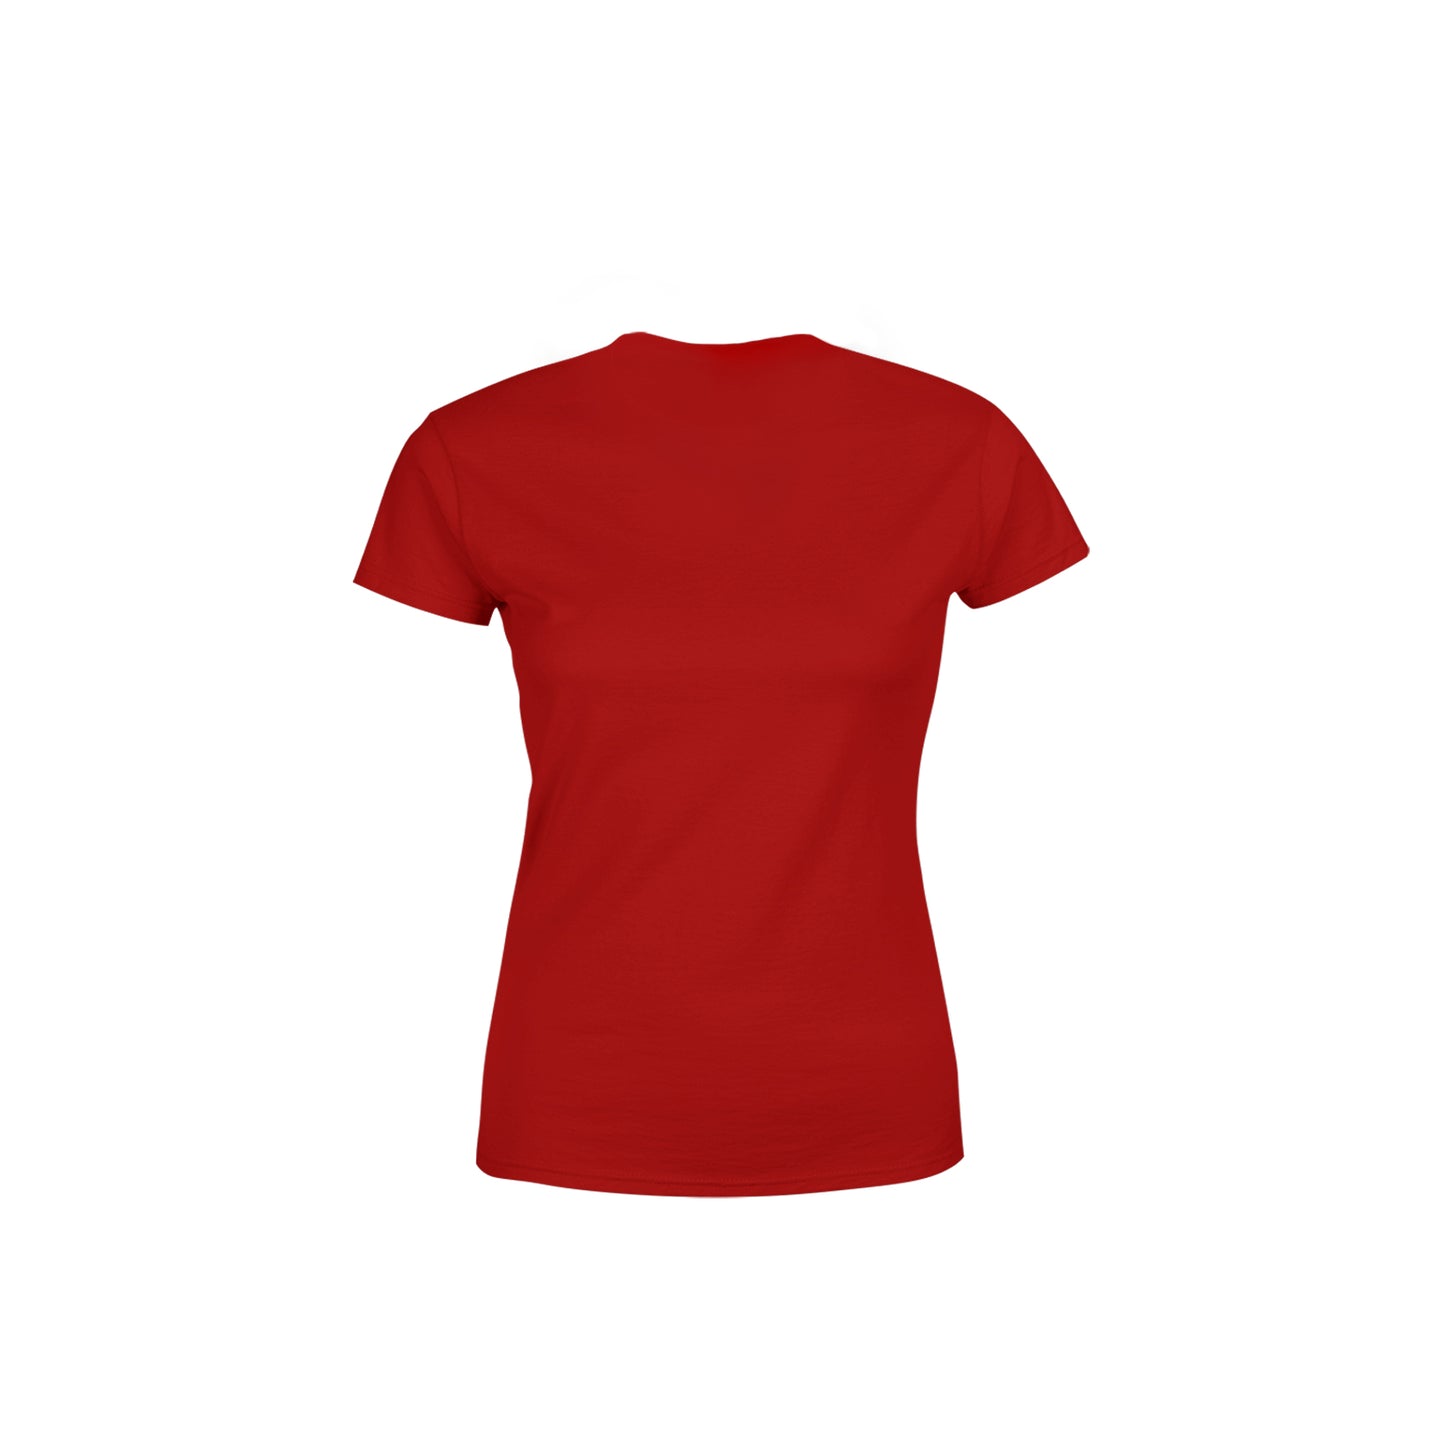 00 Number Women's T-Shirt (Red)